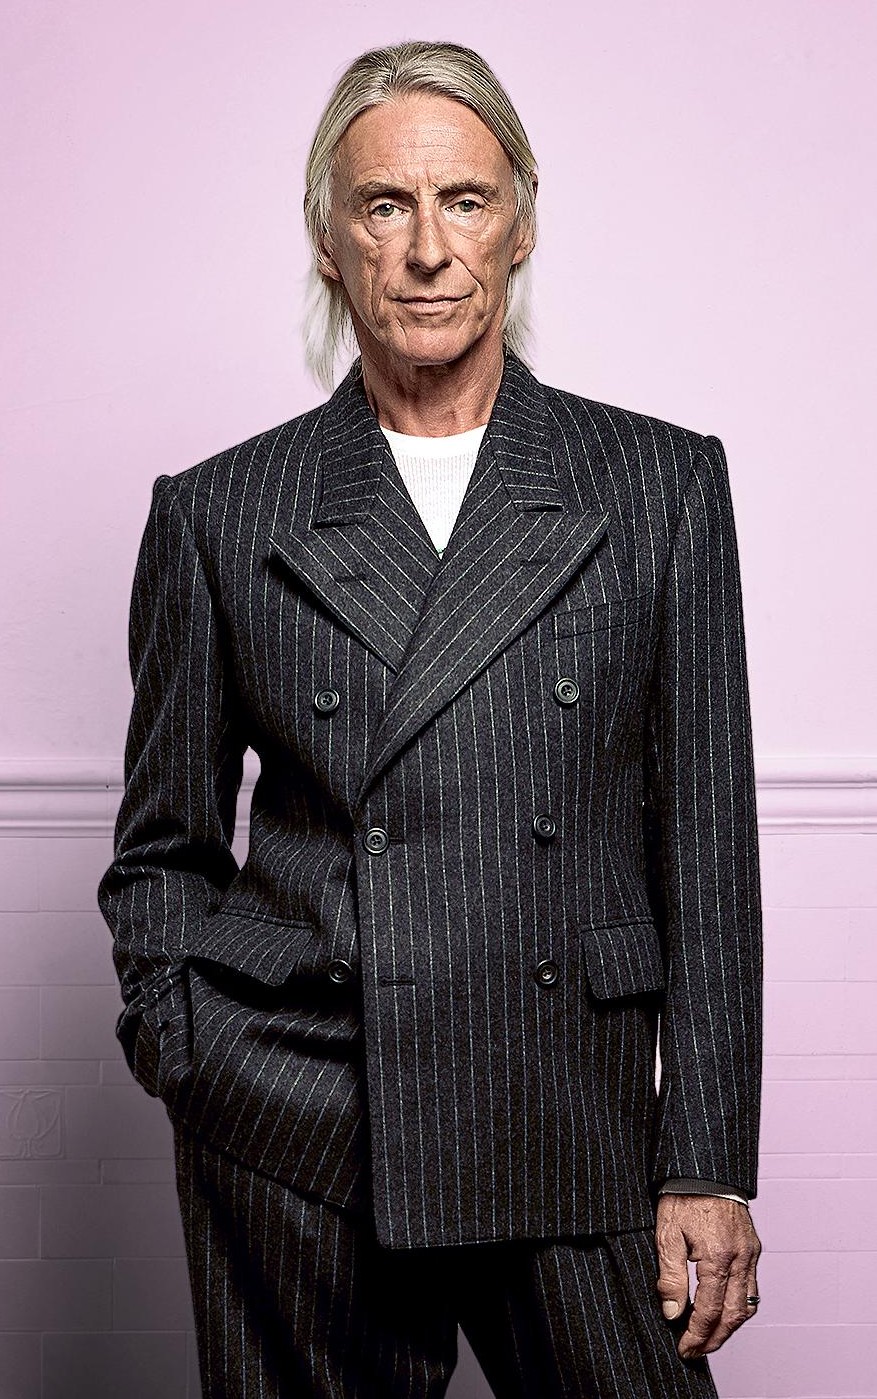  Happy Birthday to Paul Weller (ex The Jam/The Style Council)       